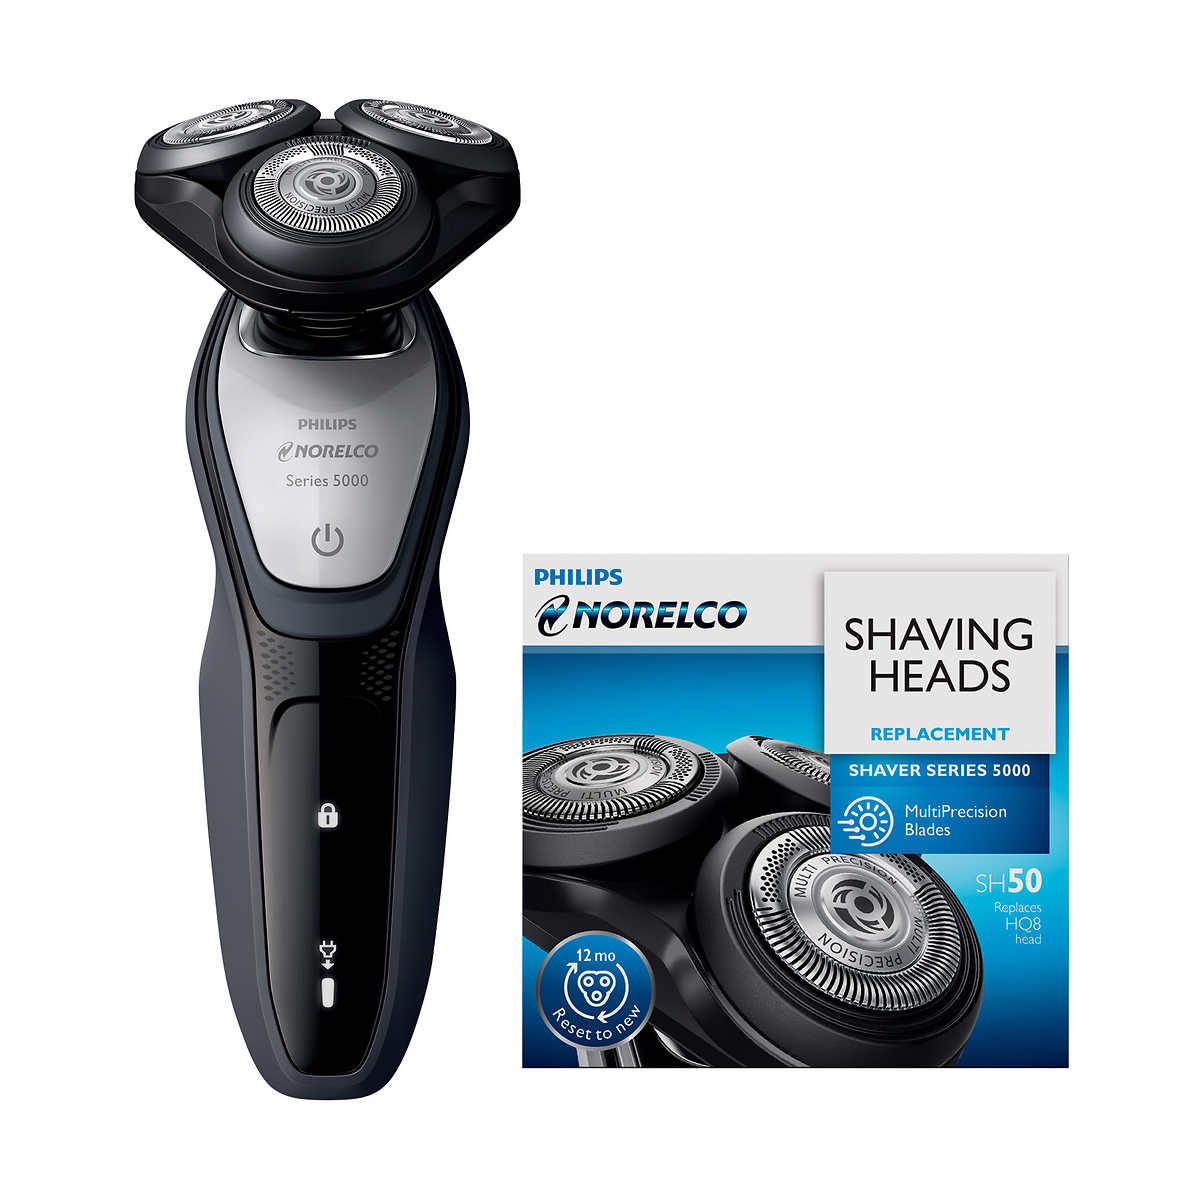 mens electric shavers at costco